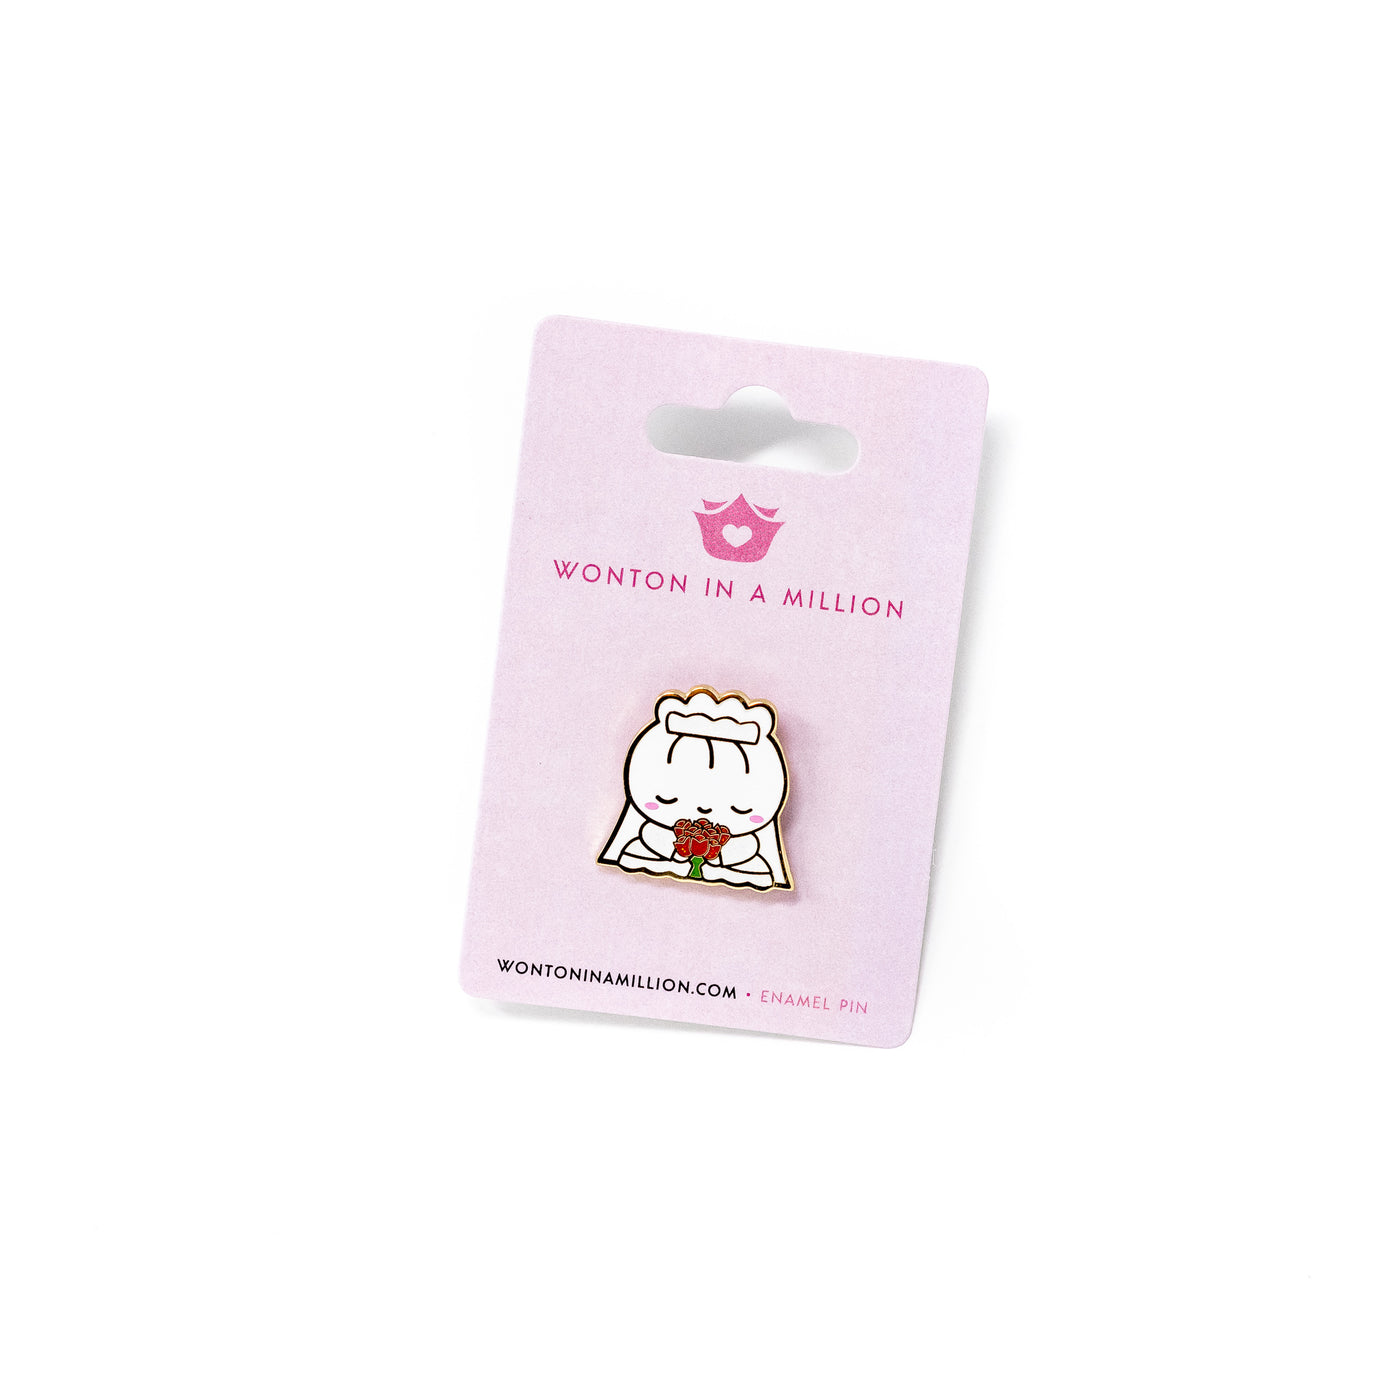 PINS008 | Wedding Steamie and Suey Bride and Groom Pins (Set of 2)